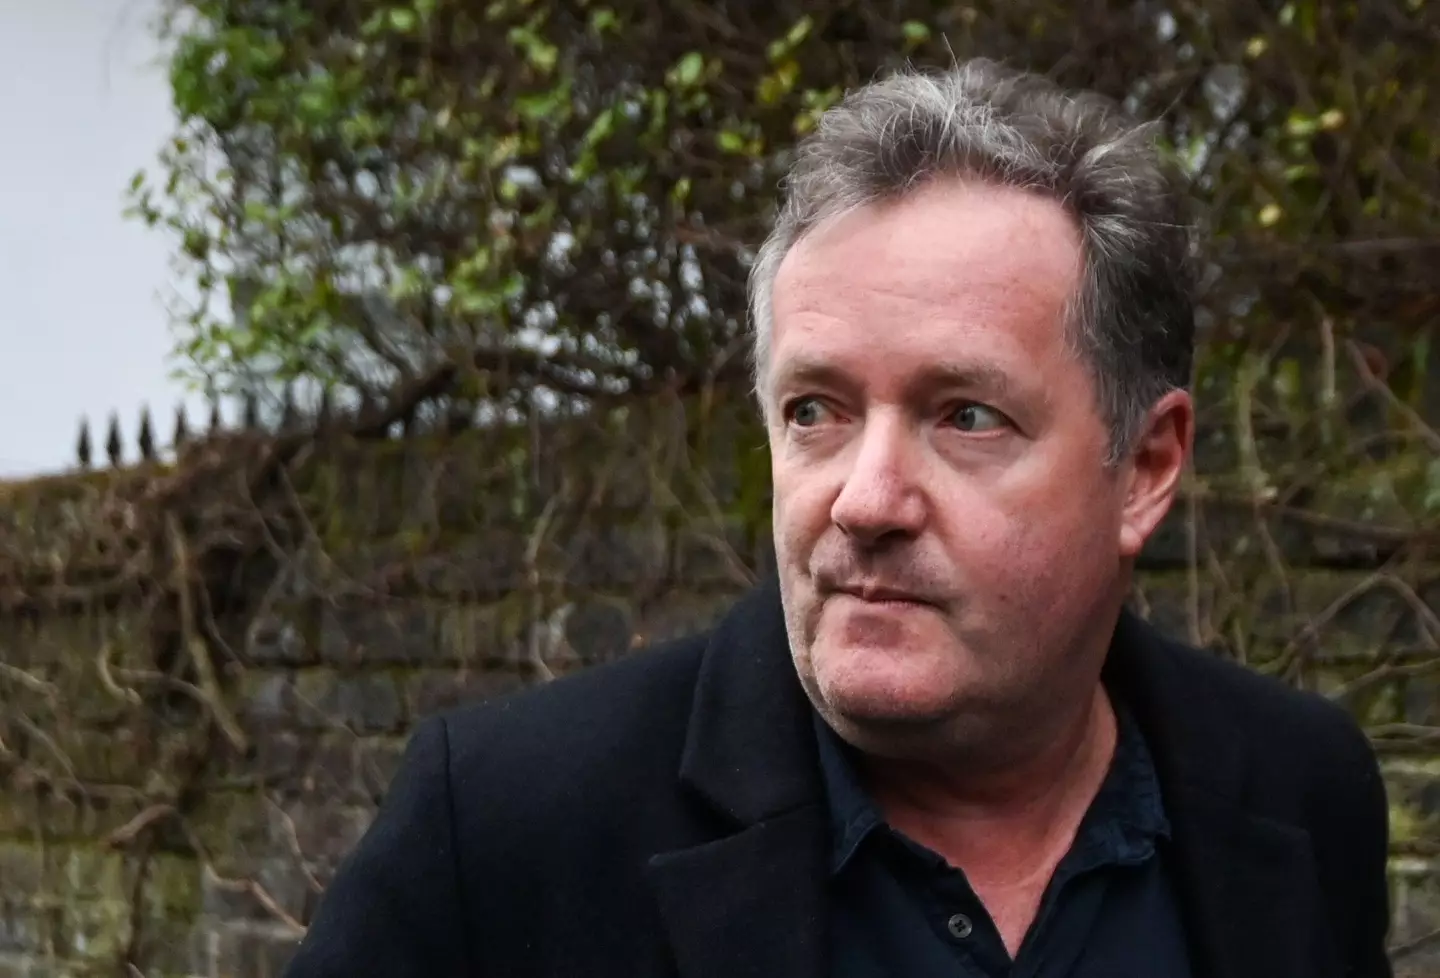 Piers Morgan has declared himself 'very happy' for not apologising to Meghan Markle.